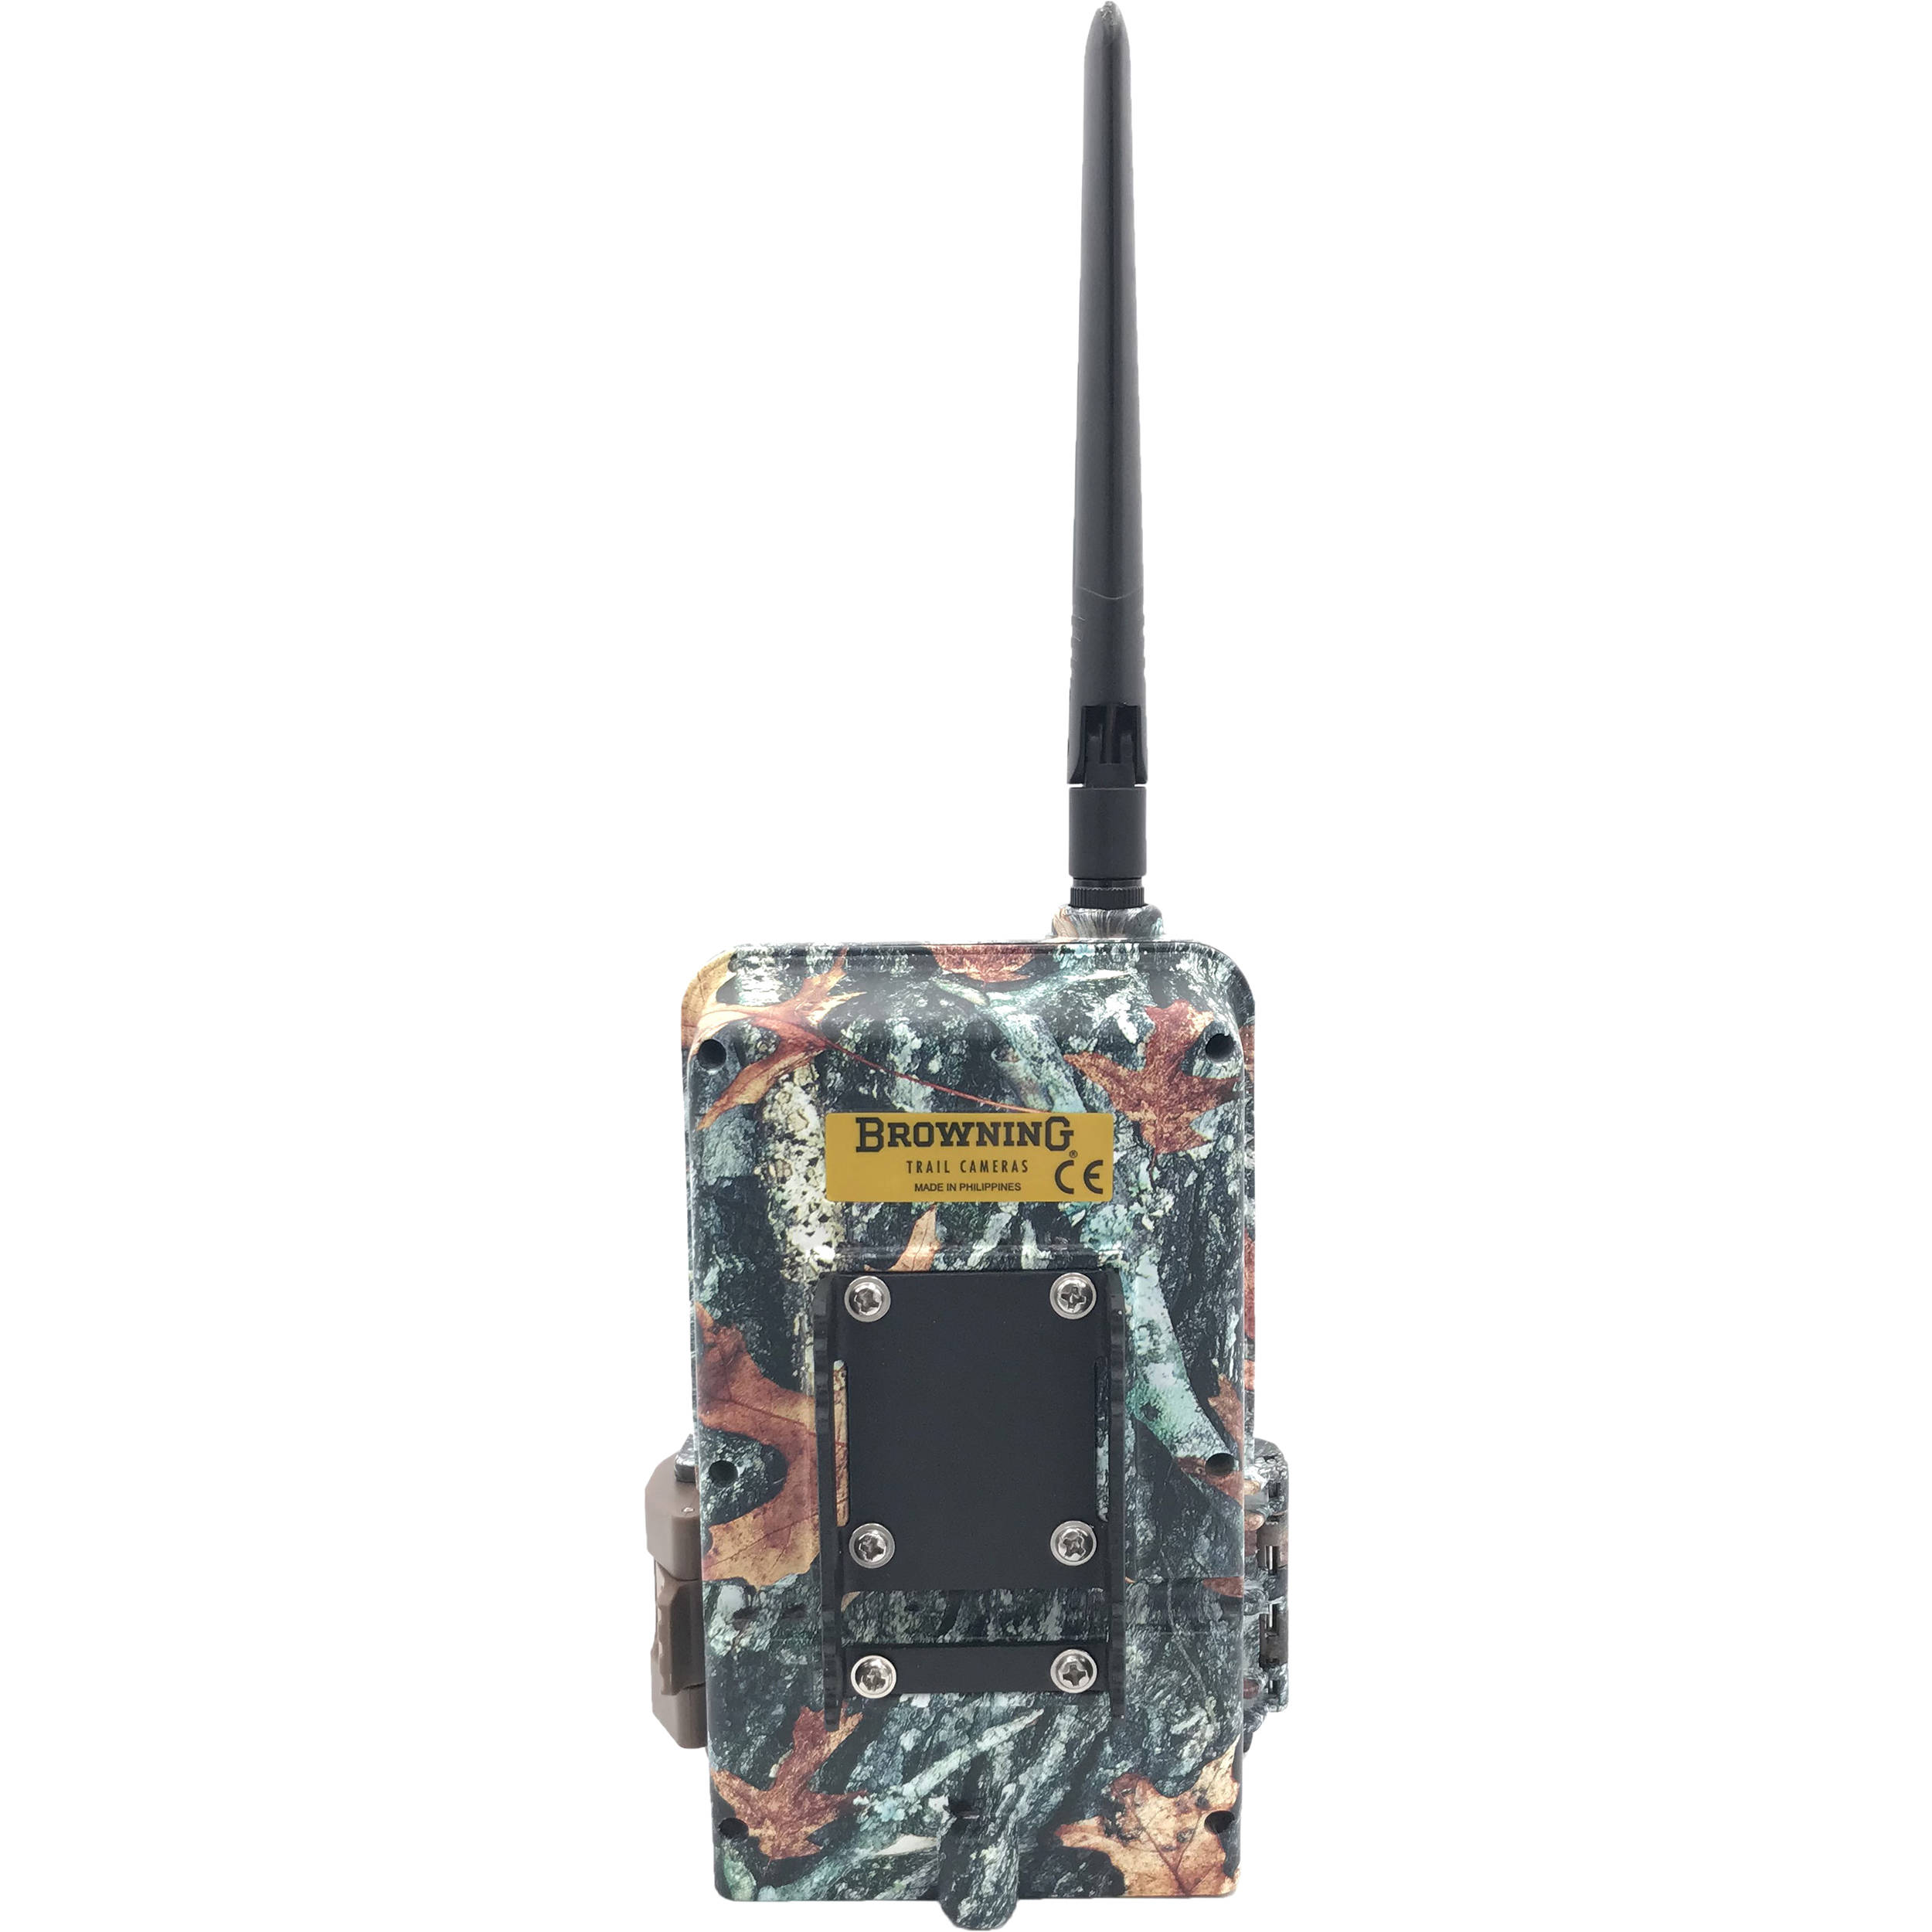 Browning IR Trail Camera Defender Pro Scout 16MP Verizon Cellular - image 3 of 4